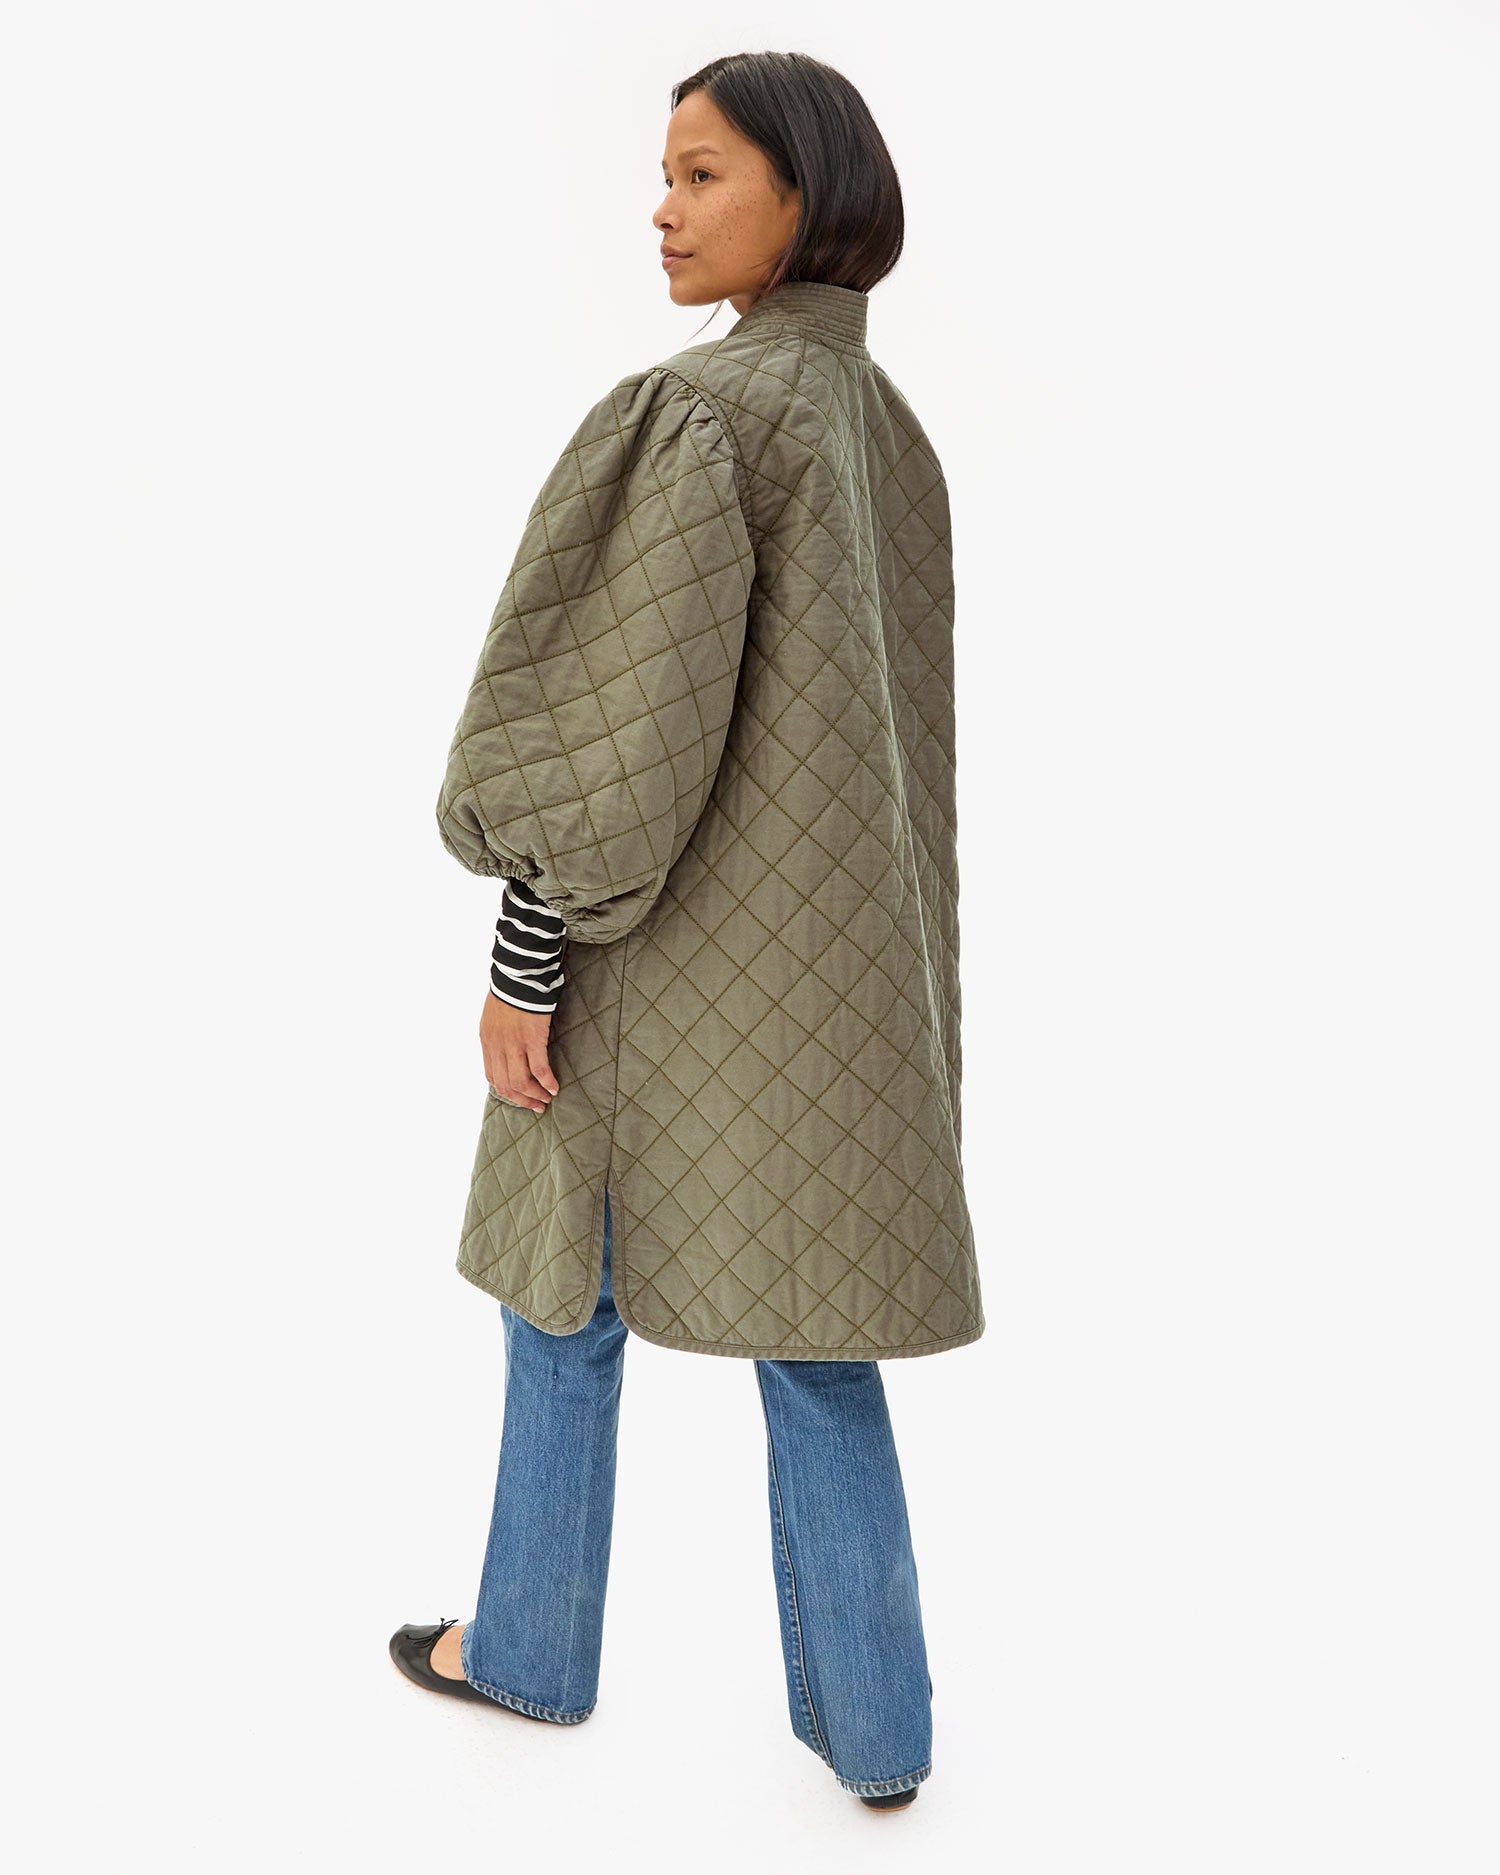 Profile view of Maly wearing the Olive Quilted Clemence Car Coat.